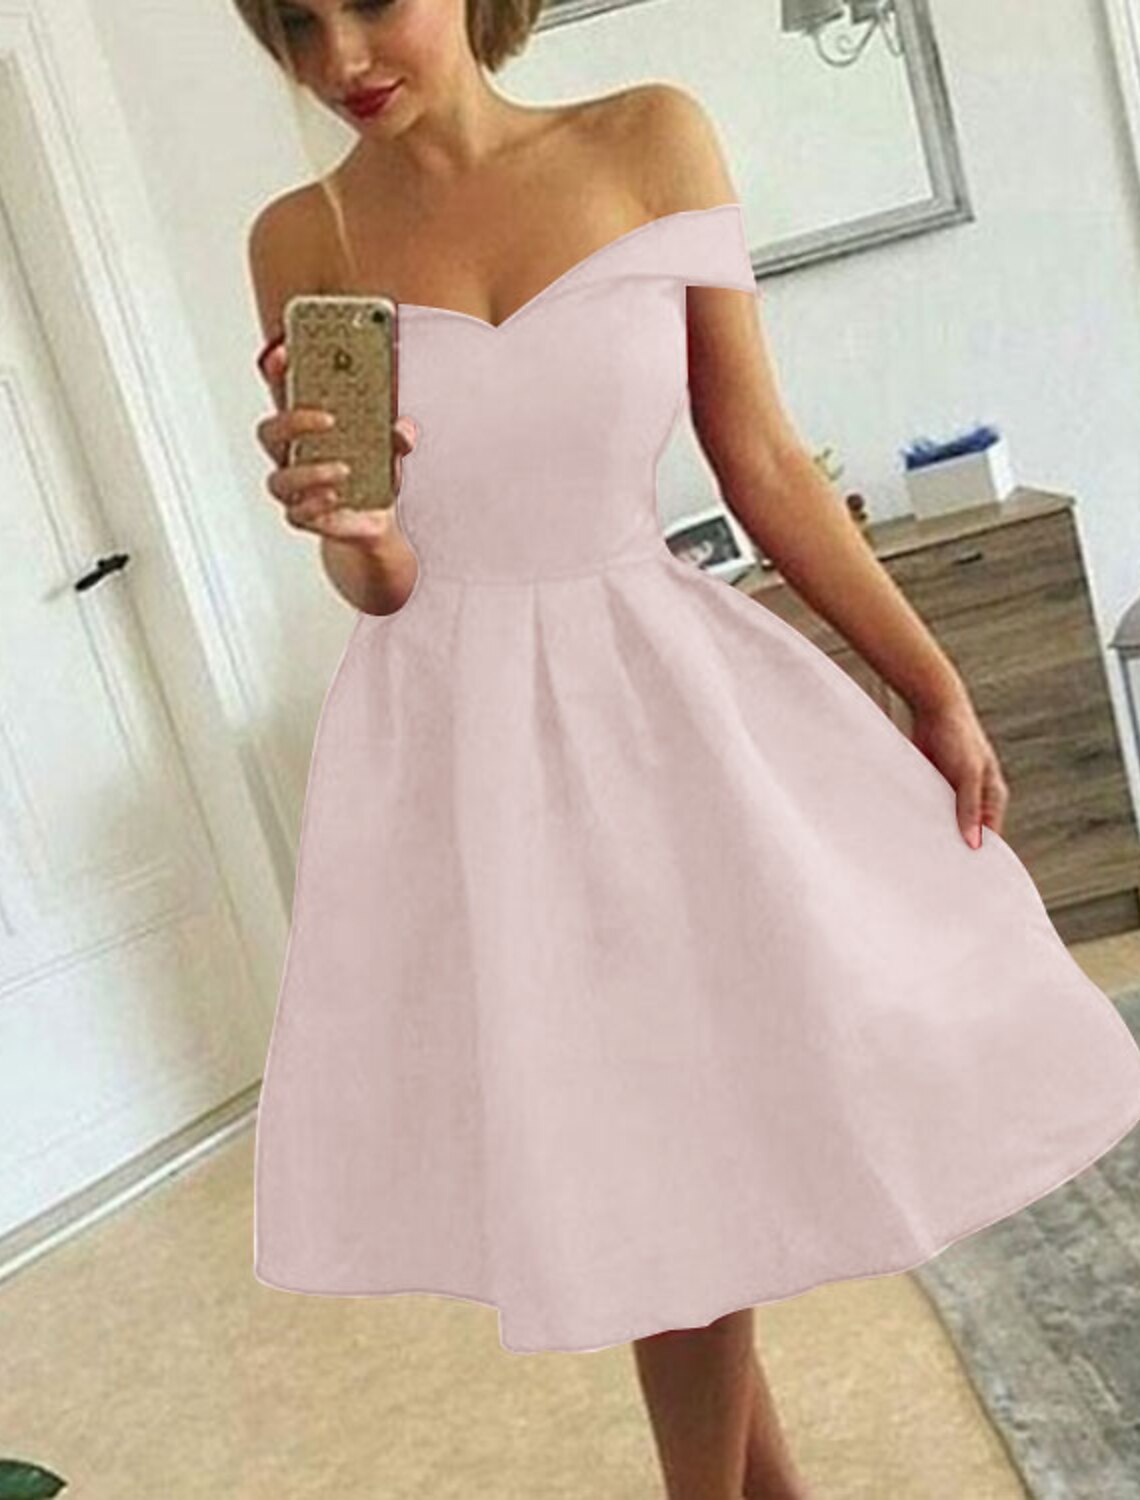 A-Line Vintage Sexy Homecoming Cocktail Party Dress Off Shoulder Sleeveless Knee Length Satin with Sleek